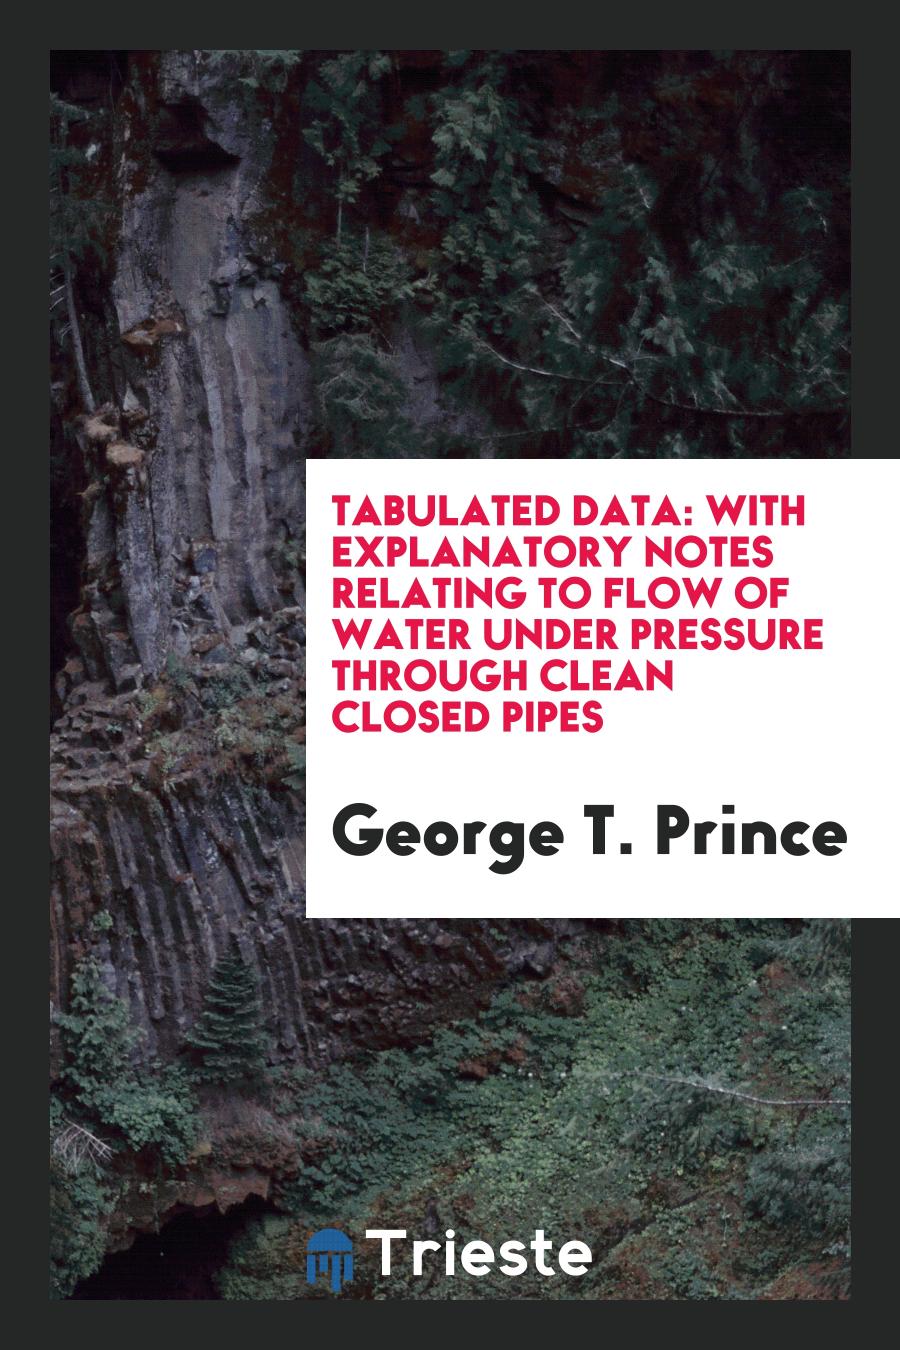 Tabulated Data: With Explanatory Notes Relating to Flow of Water Under Pressure Through Clean Closed Pipes